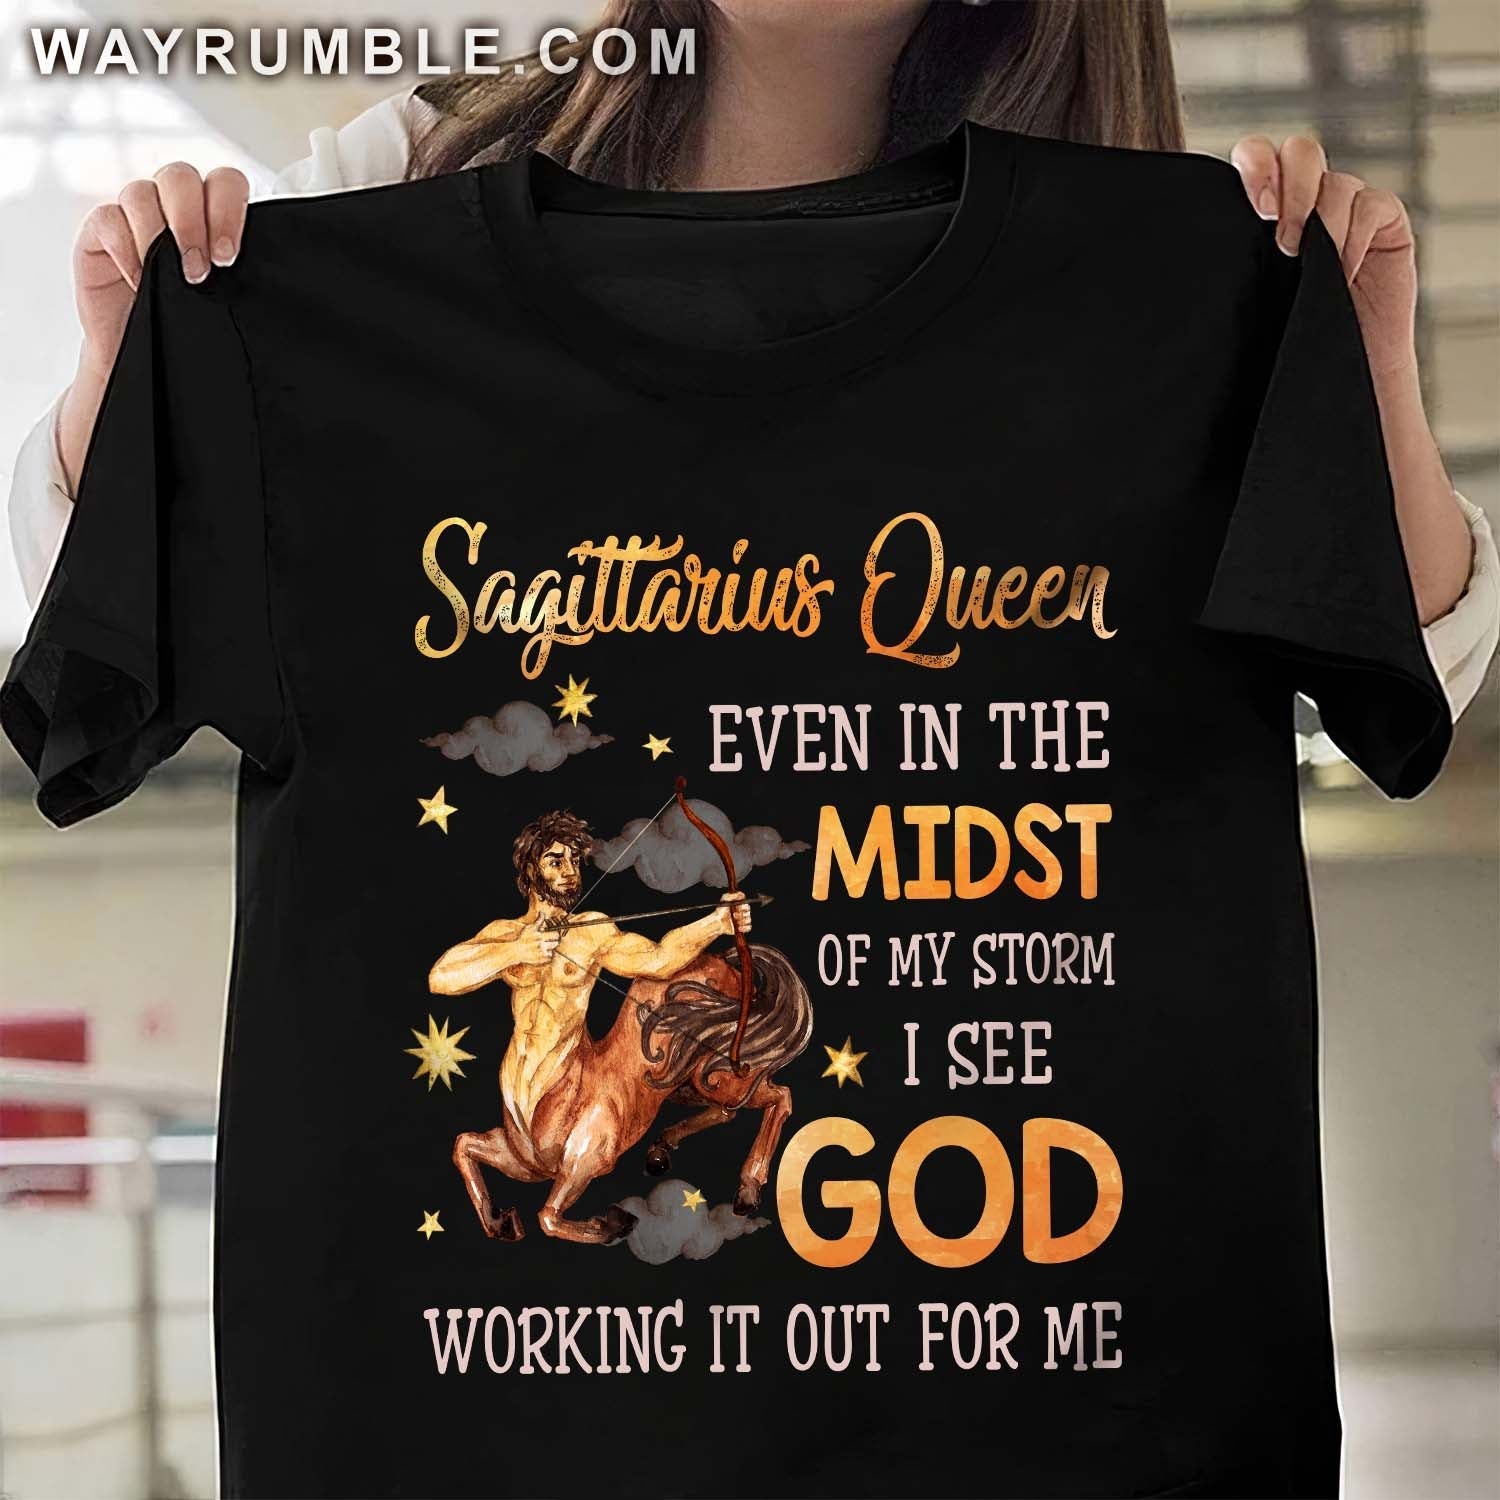 Sagittarius Queen, Even in the midst of my storm I see God working it out for me – Jesus, Zodiac signs T Shirt